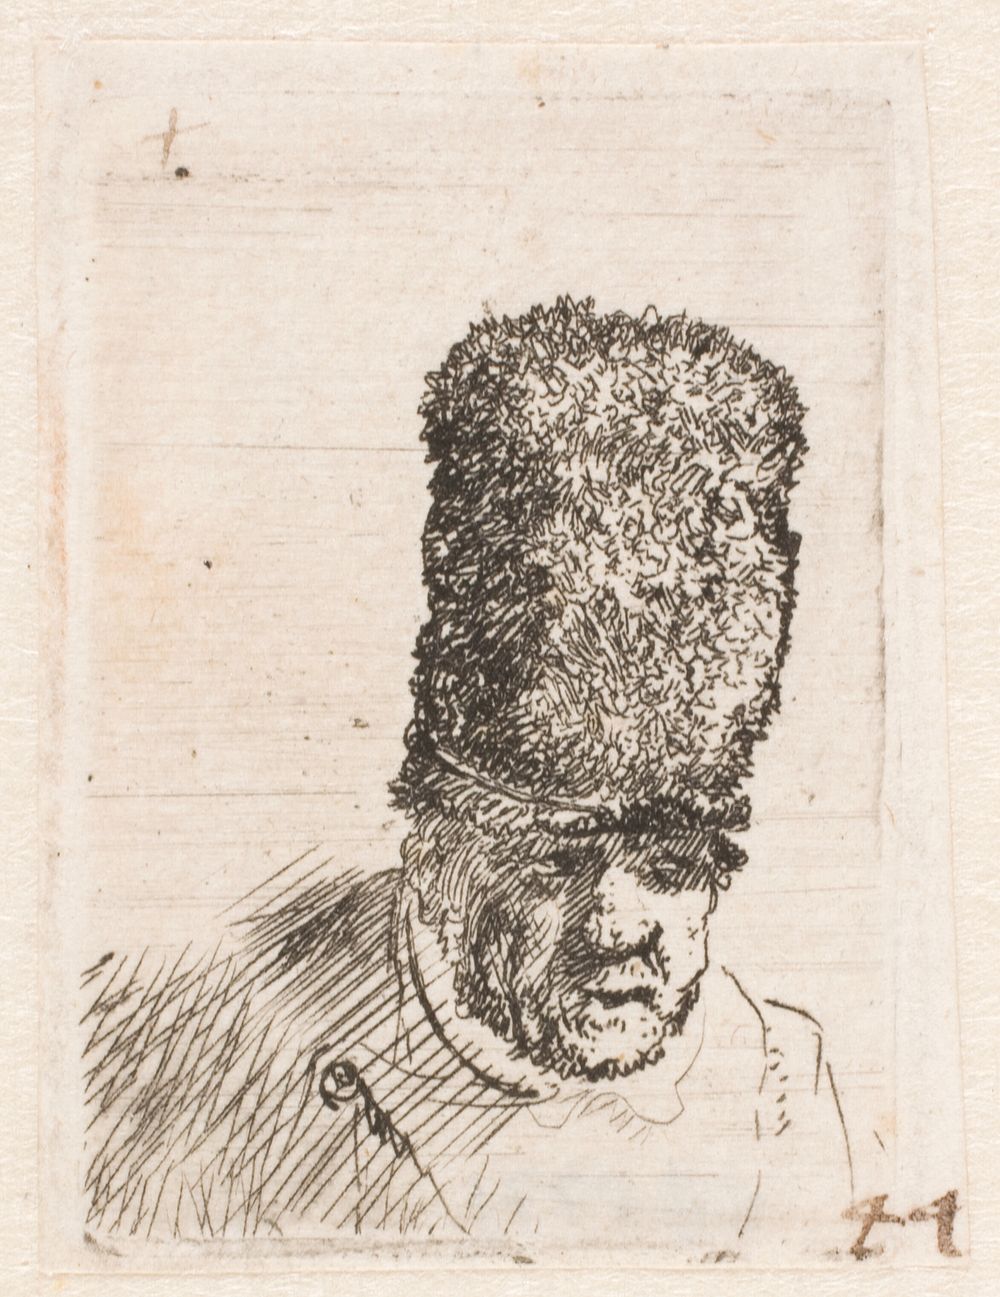 Head of old man with a tall fur hat by Rembrandt van Rijn